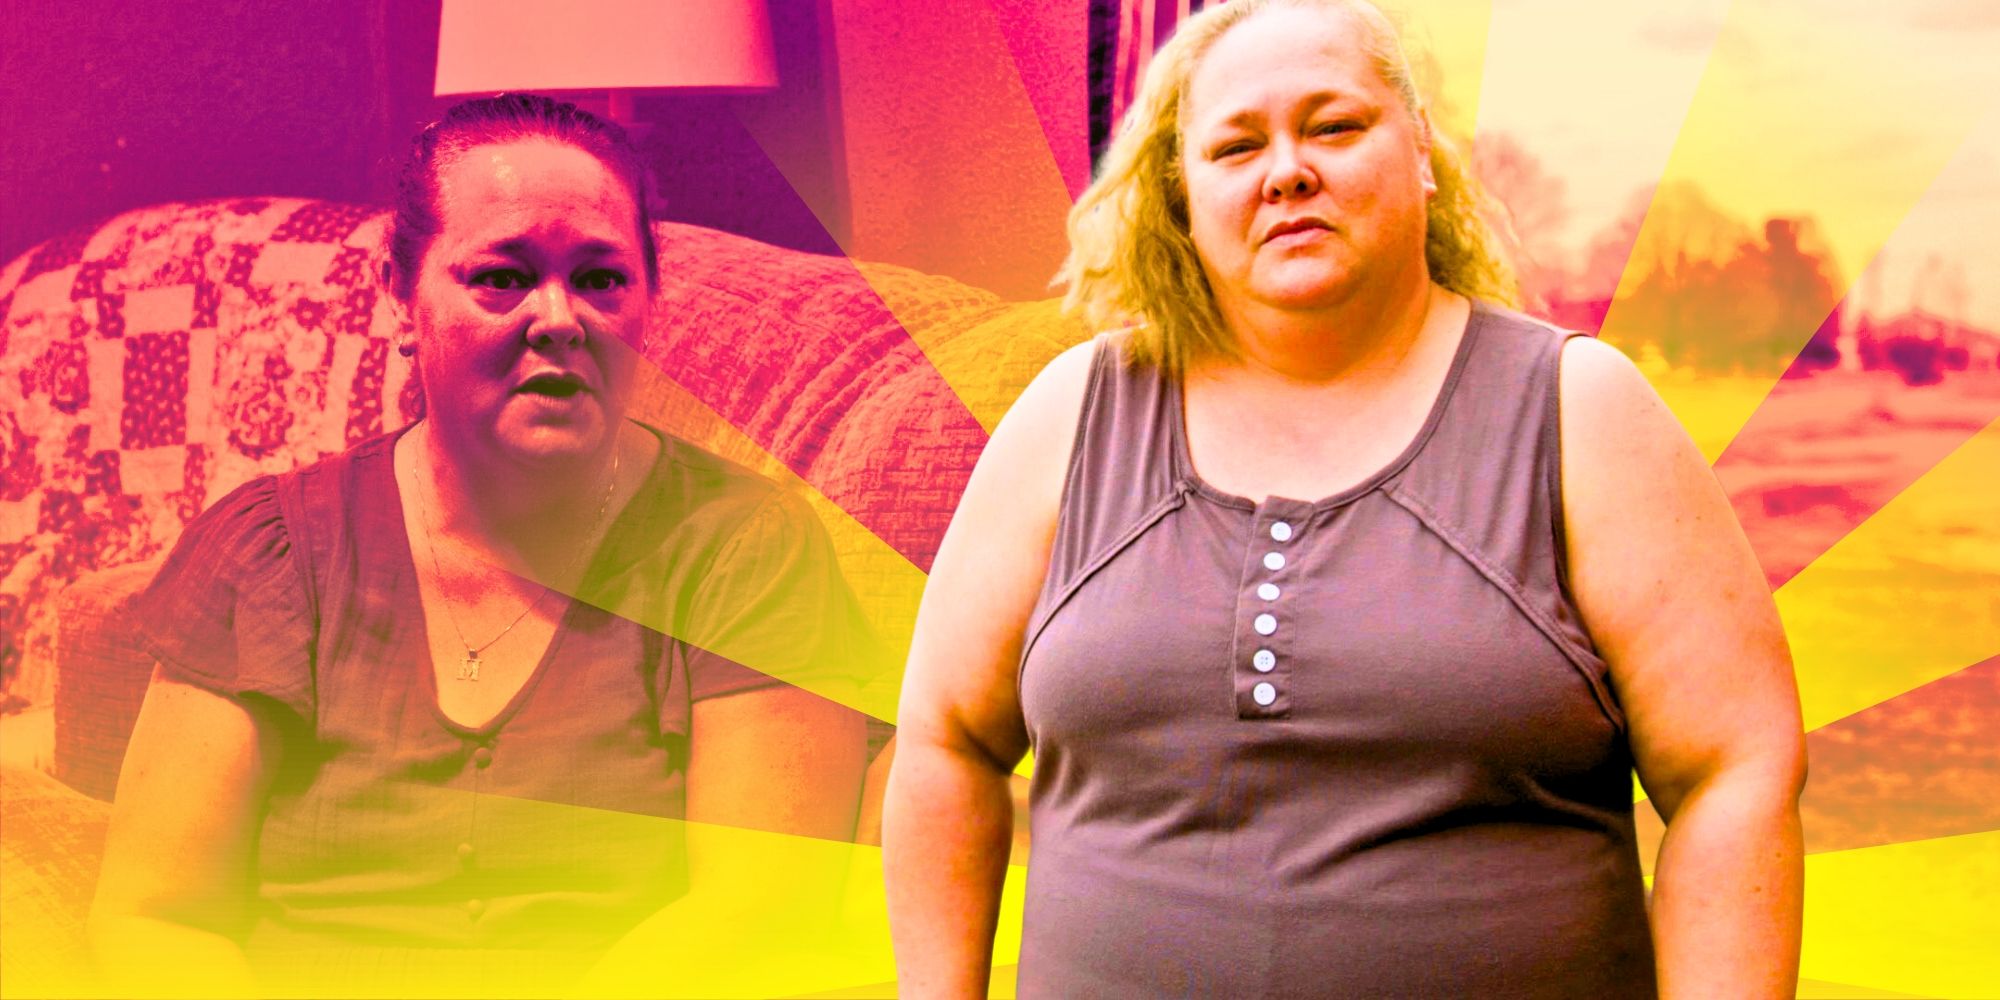 1000-Lb Sisters Misty Slaton montage pink background and bright yellow